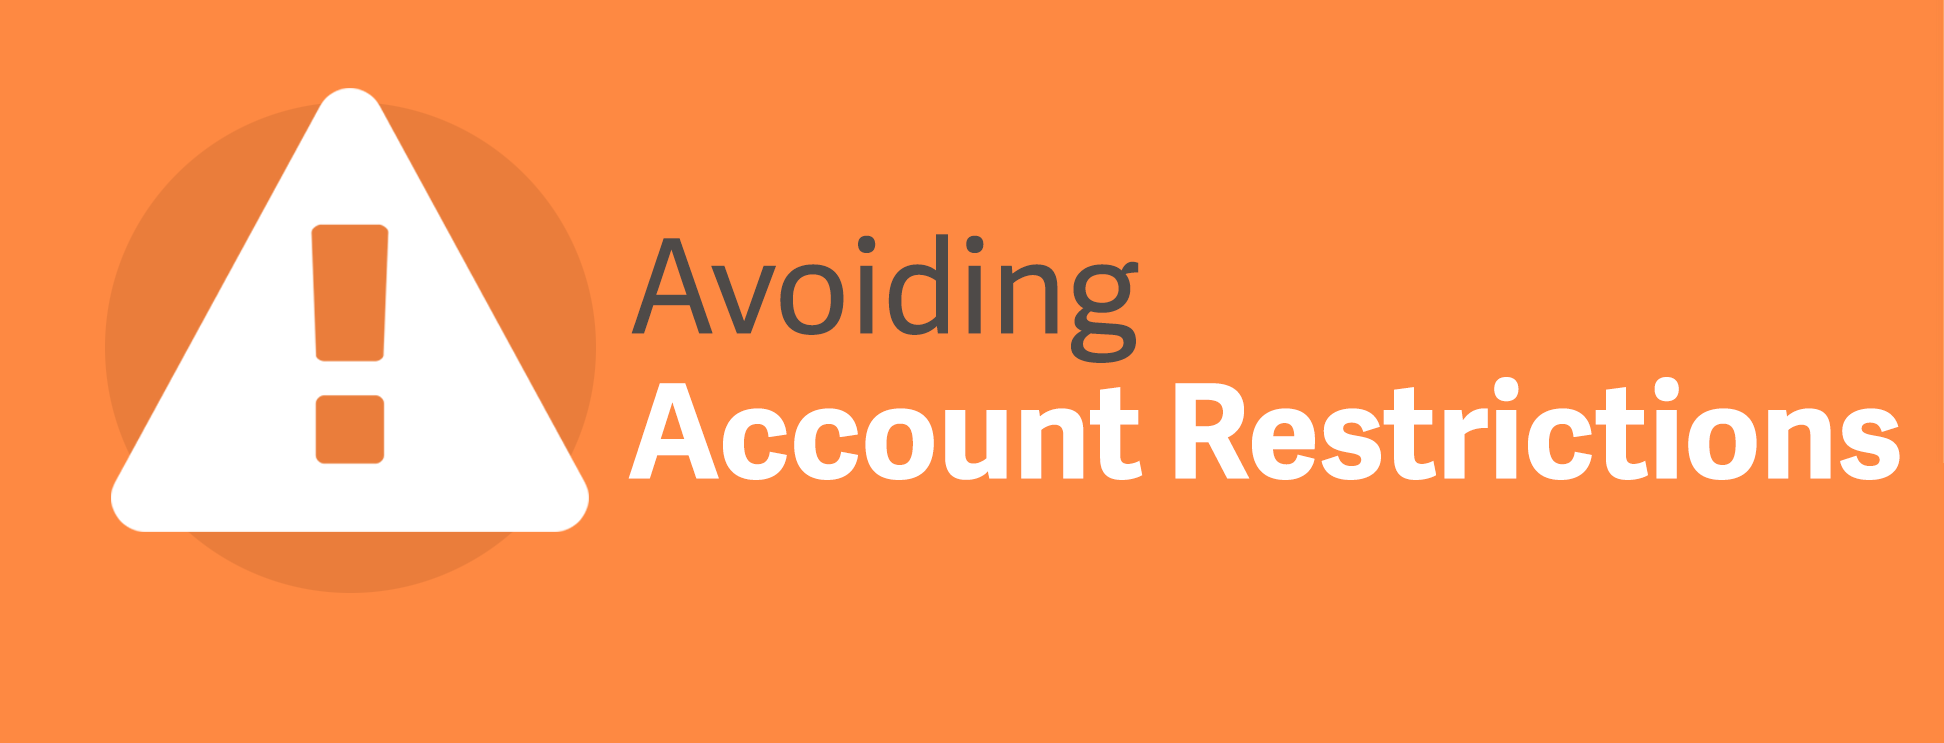 Account Restrictions